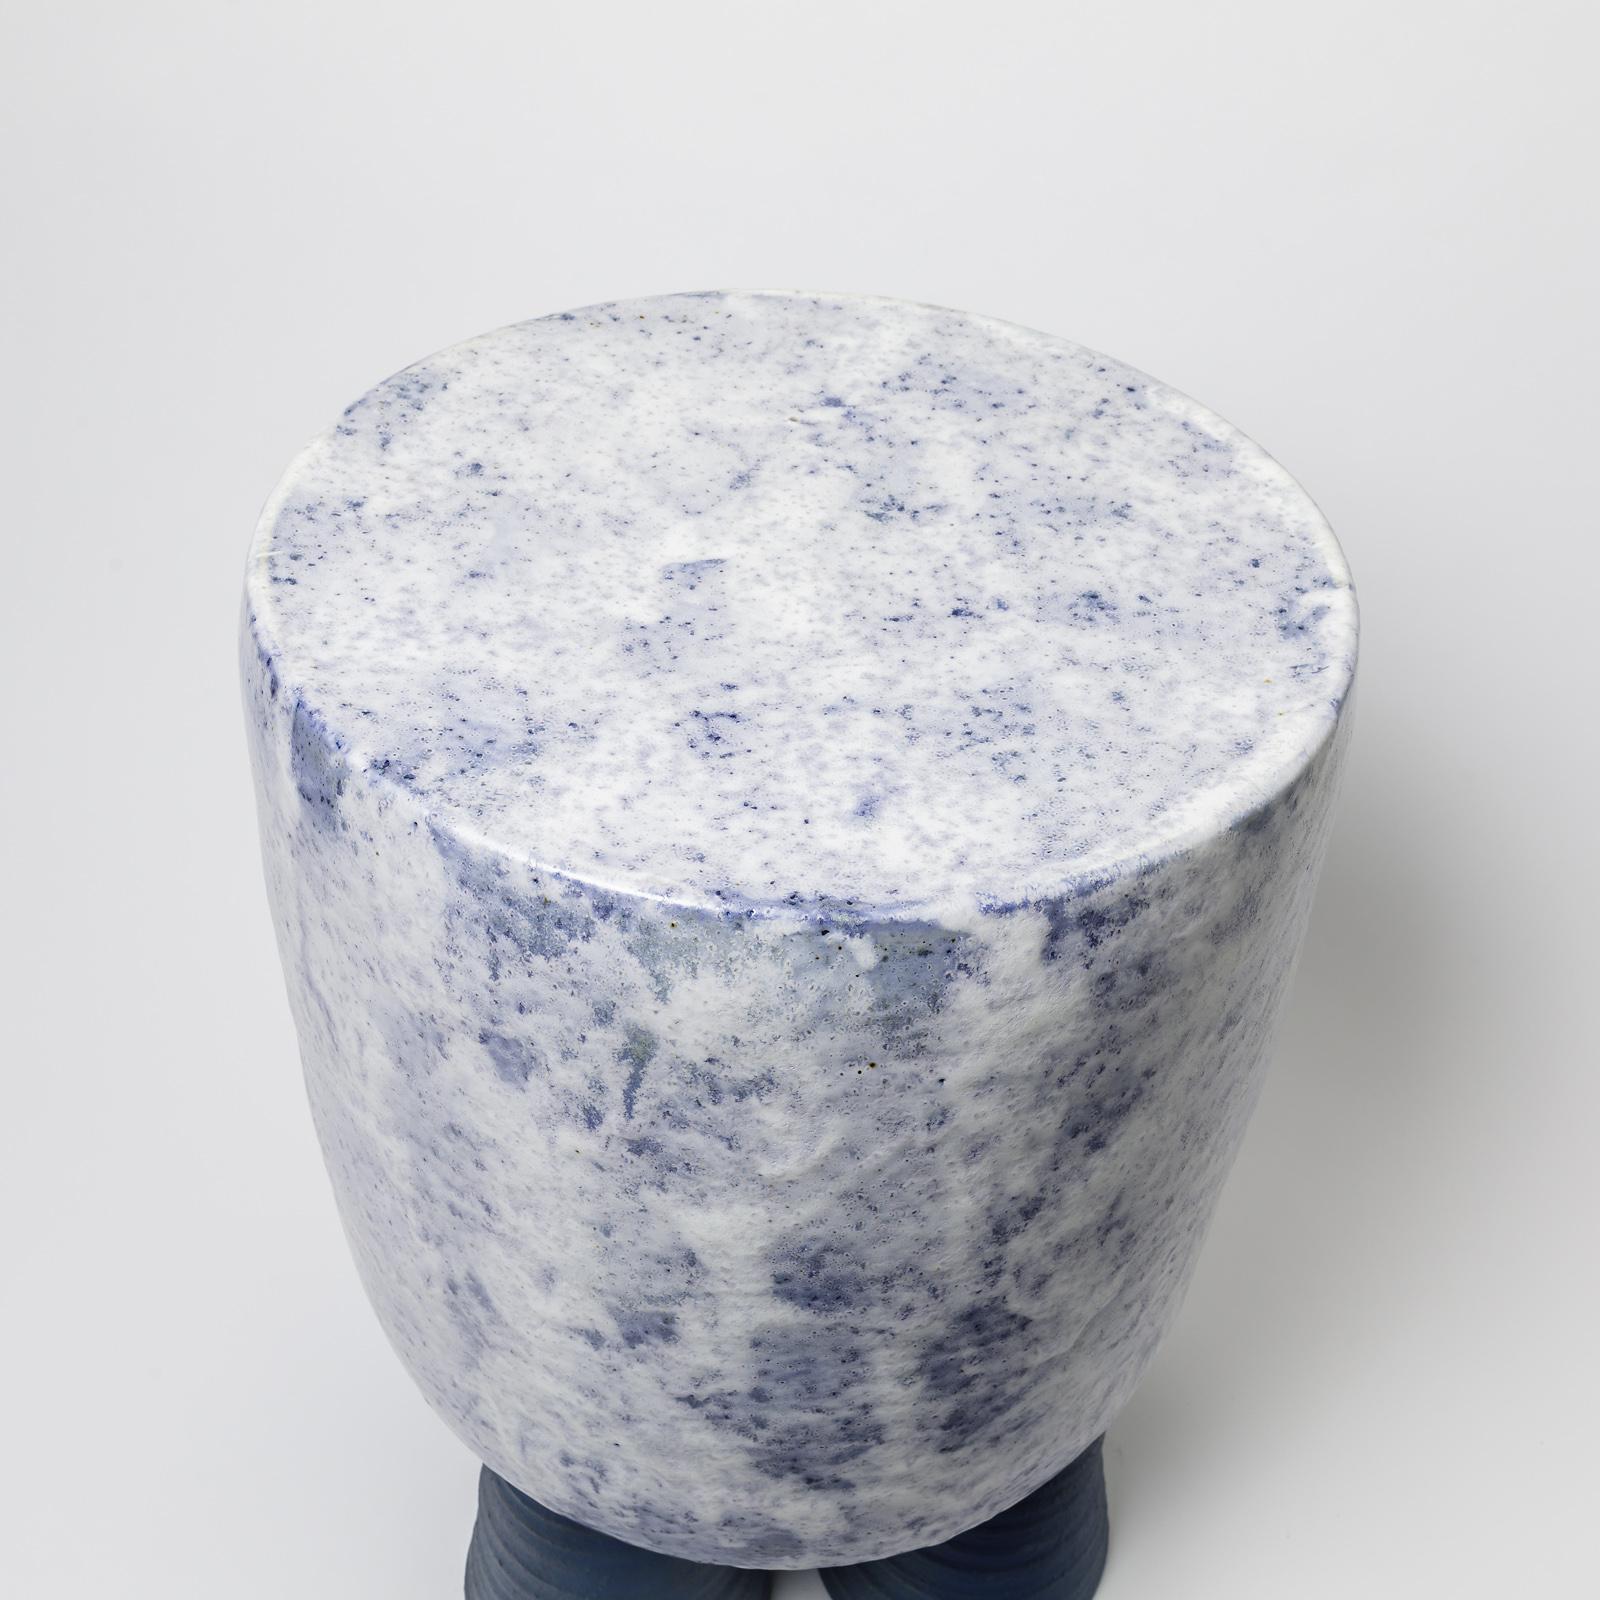 Contemporary Ceramic Stool or Table with Glazes Decoration by Mia Jensen, circa 2021